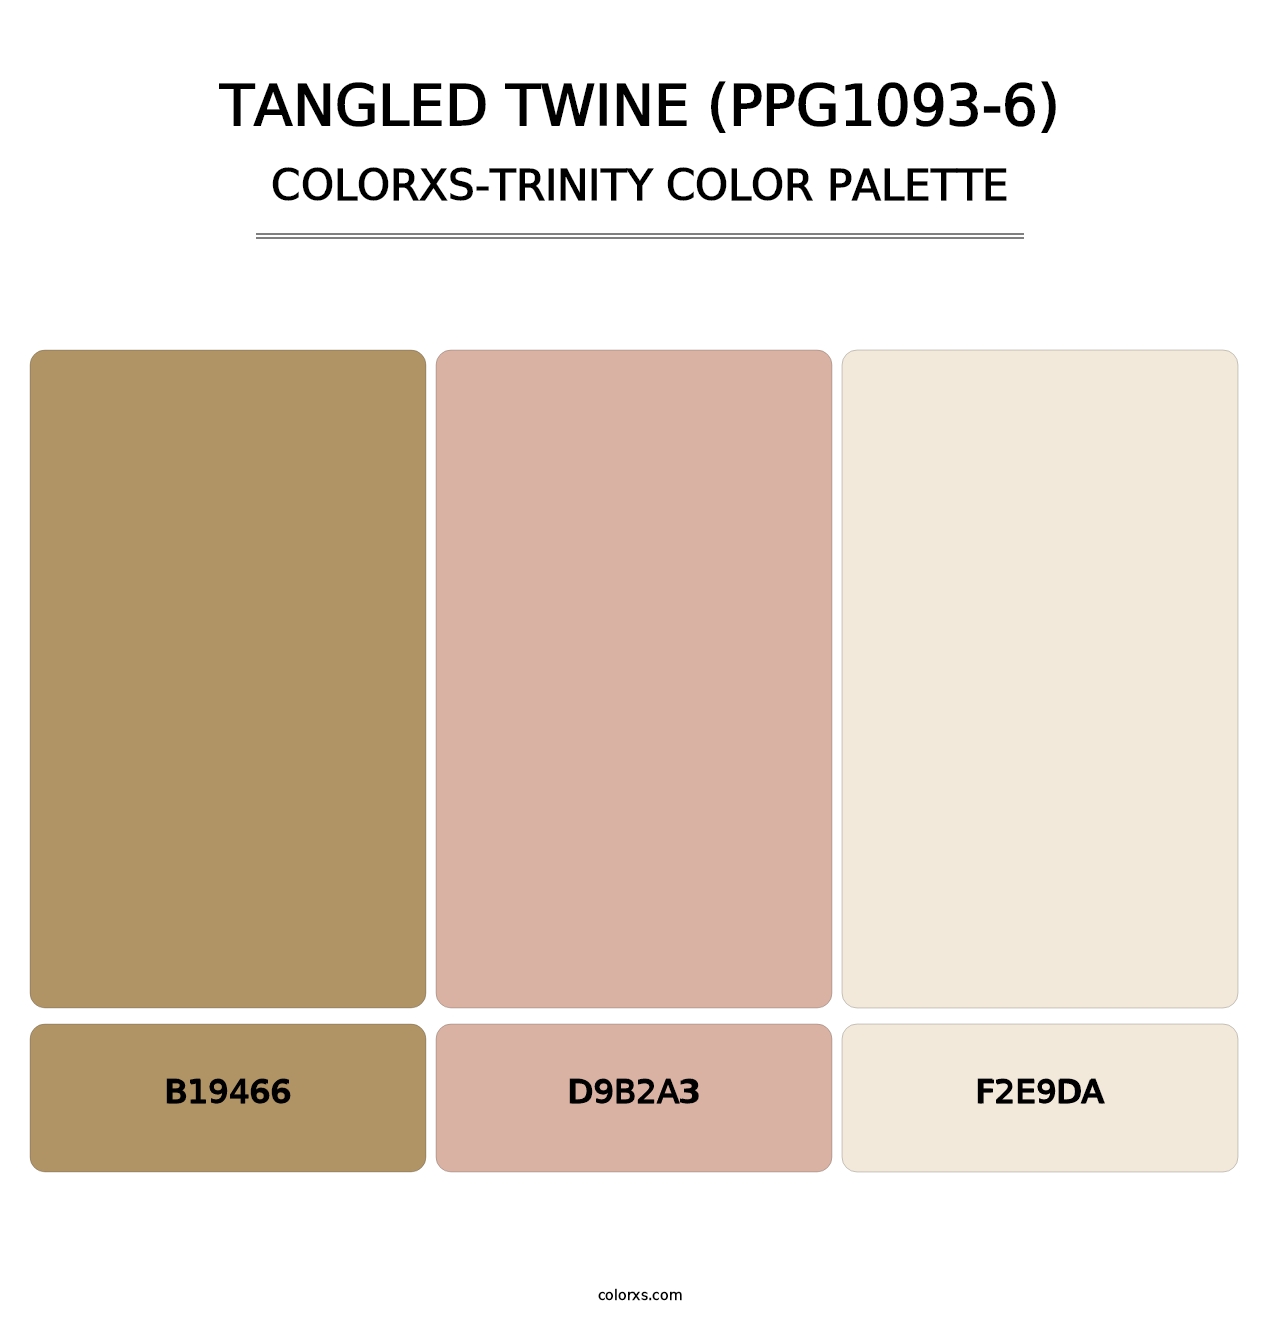 Tangled Twine (PPG1093-6) - Colorxs Trinity Palette